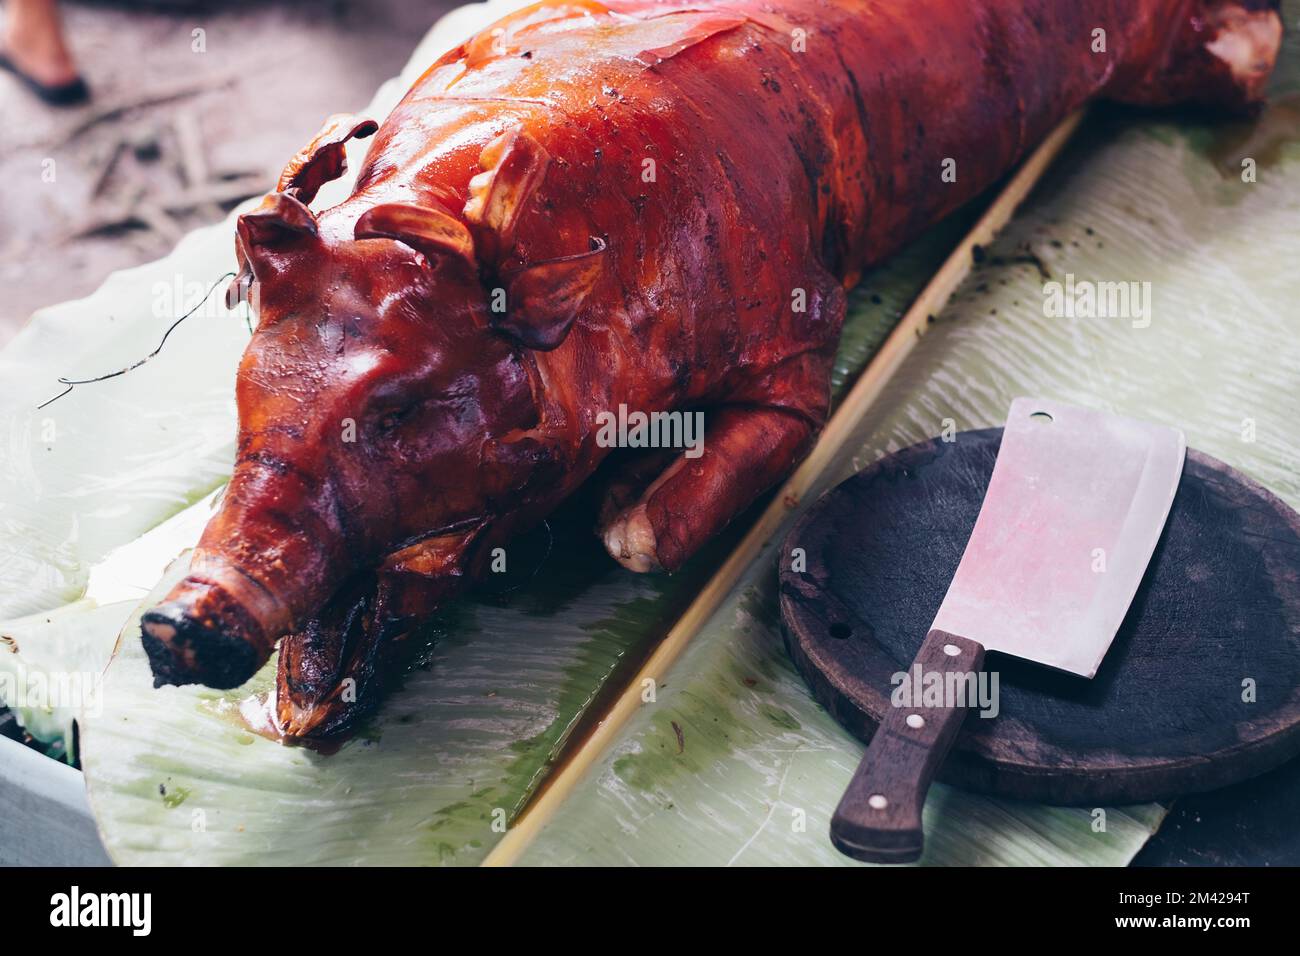 Head shot of the newly cooked all time favorite, the popular delicious roasted crispy whole pig or Lechon Baboy on banana leaf. Selected focus. Stock Photo